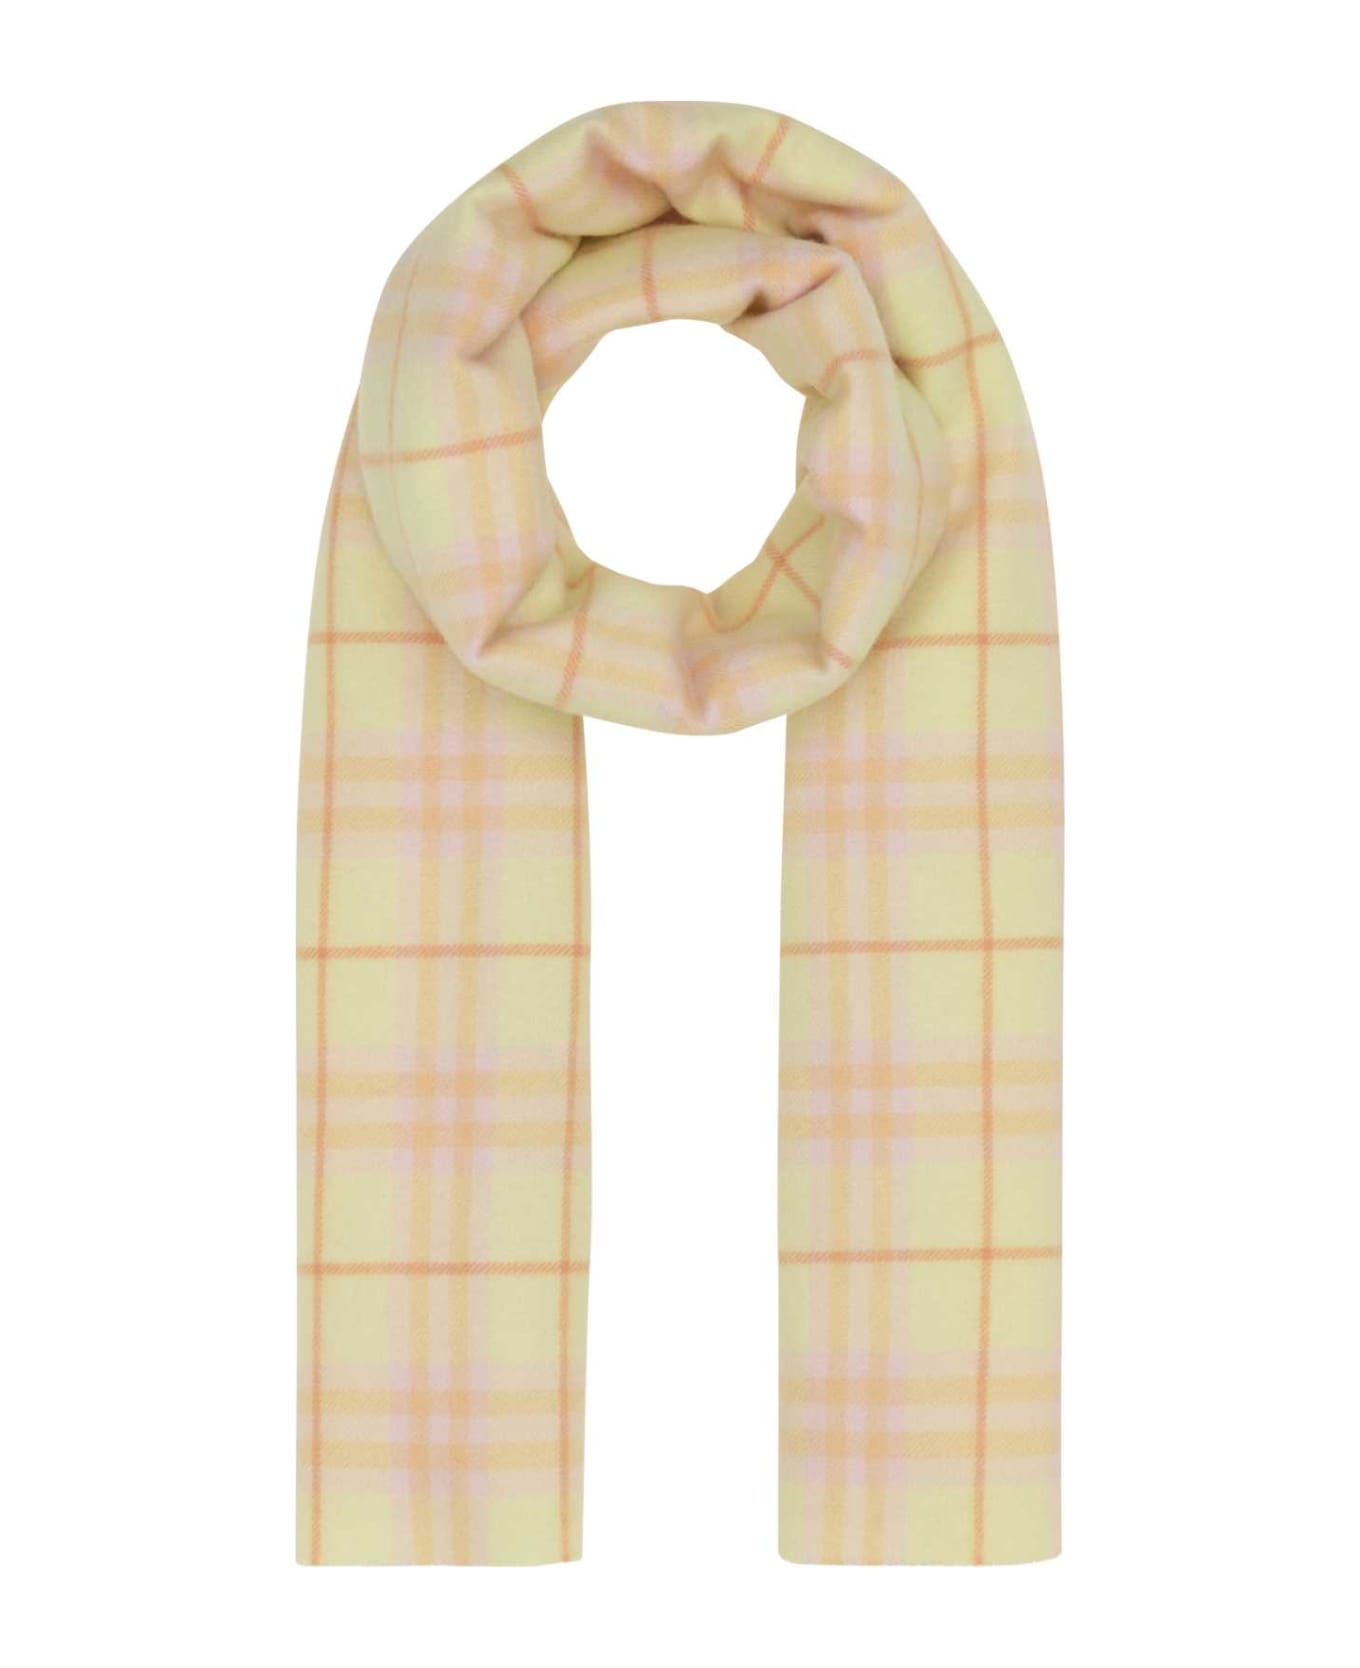 Burberry Embroidered Cashmere Scarf - SHERBET